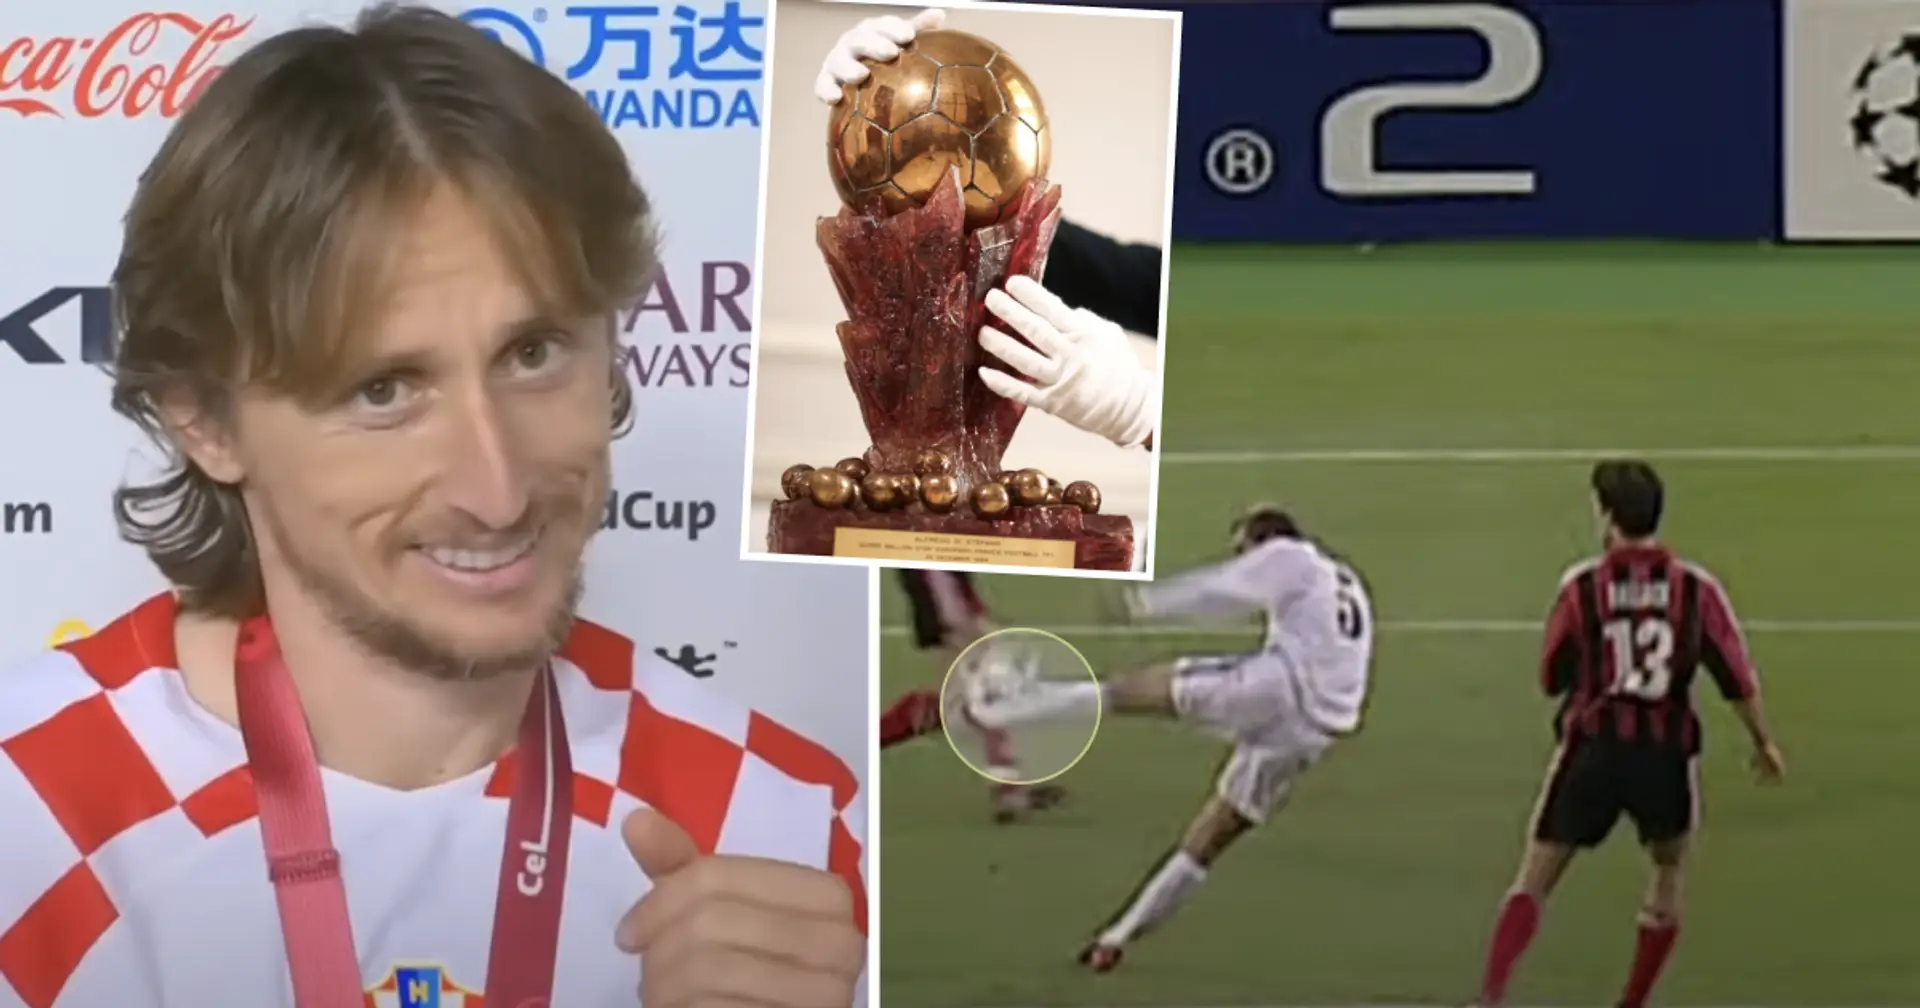 Modric ahead of Raul and more: Fan calculates 'Super Ballon d'Or' rankings over last 32 years